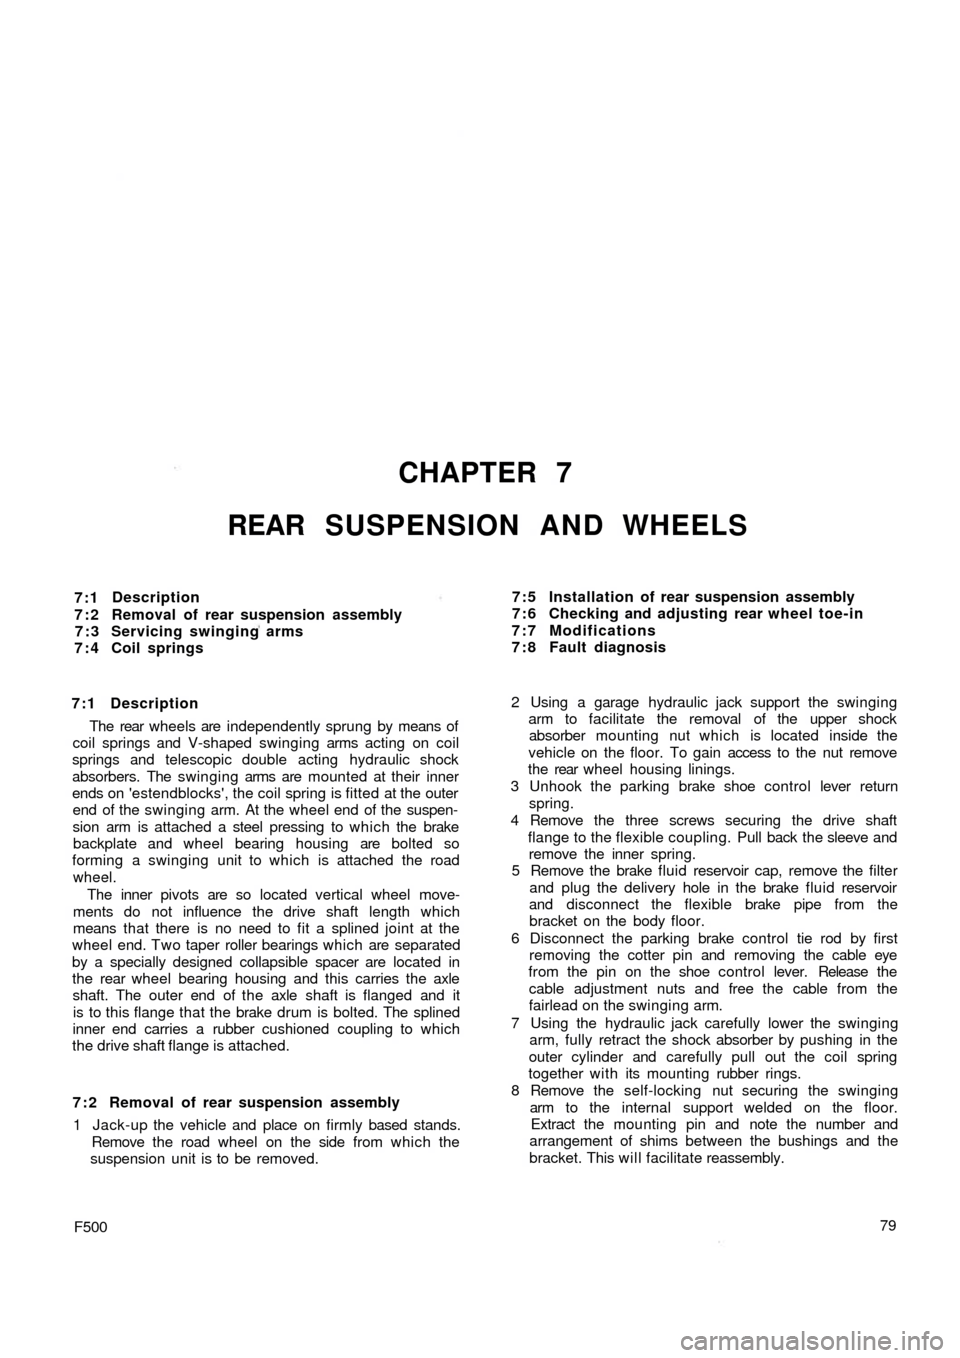 FIAT 500 1967 1.G Workshop Manual CHAPTER 7
REAR SUSPENSION AND WHEELS
7:1
7:2
7:3
7:4Description
Removal of rear suspension assembly
Servicing swinging arms
Coil springs
7:1 Description
The  rear  wheels are independently sprung by m